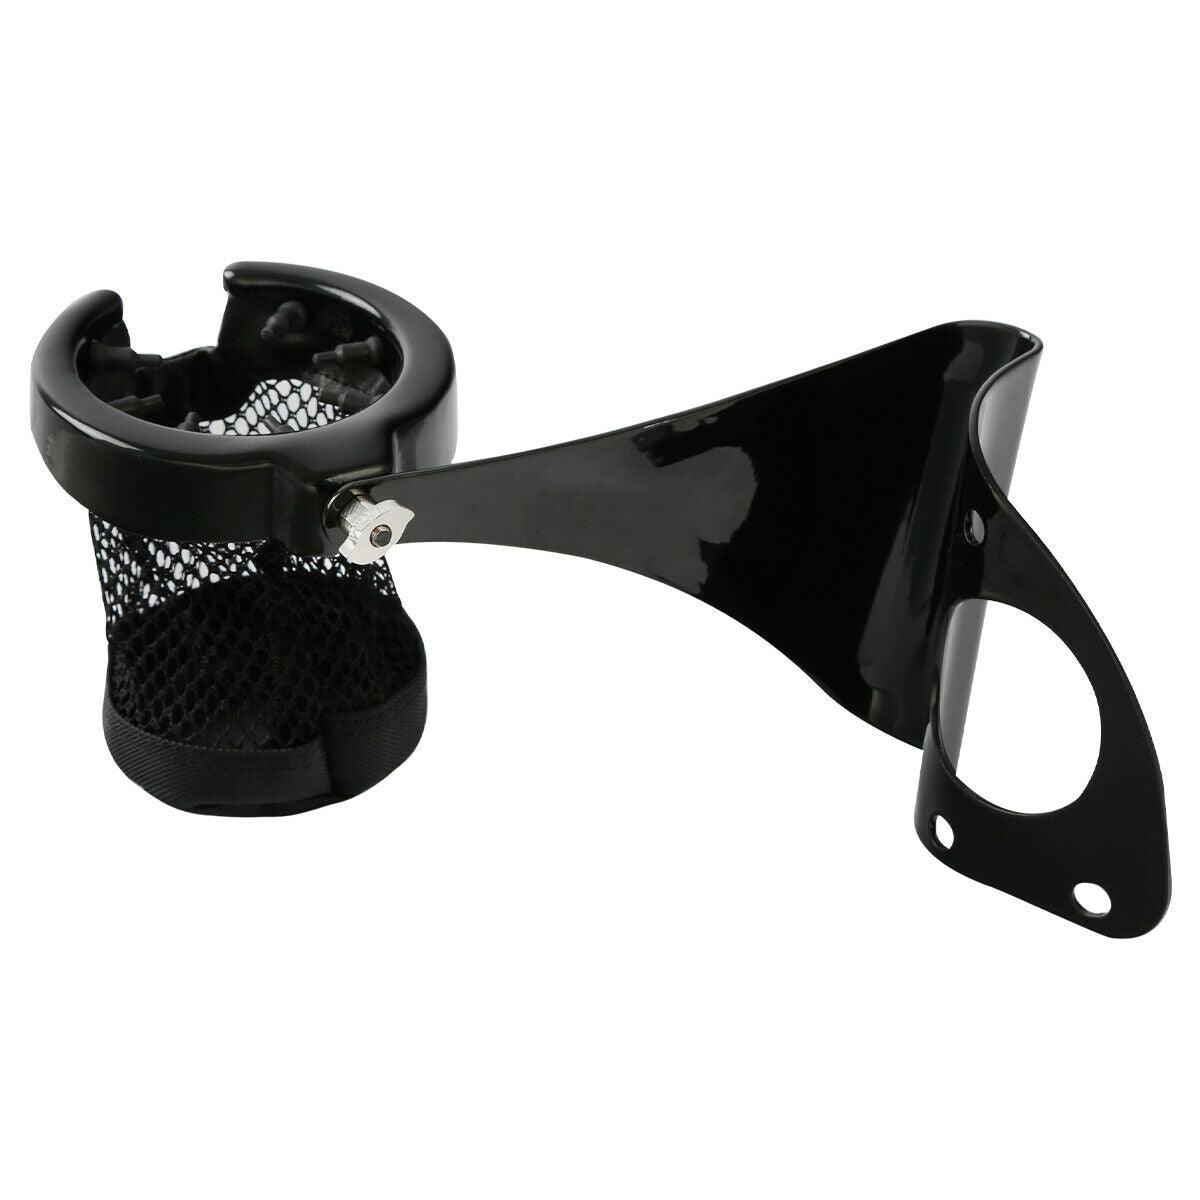 Rear Drink Cup Holder Passenger Fit For Harley Touring Street Road Glide 2014-Up - Moto Life Products